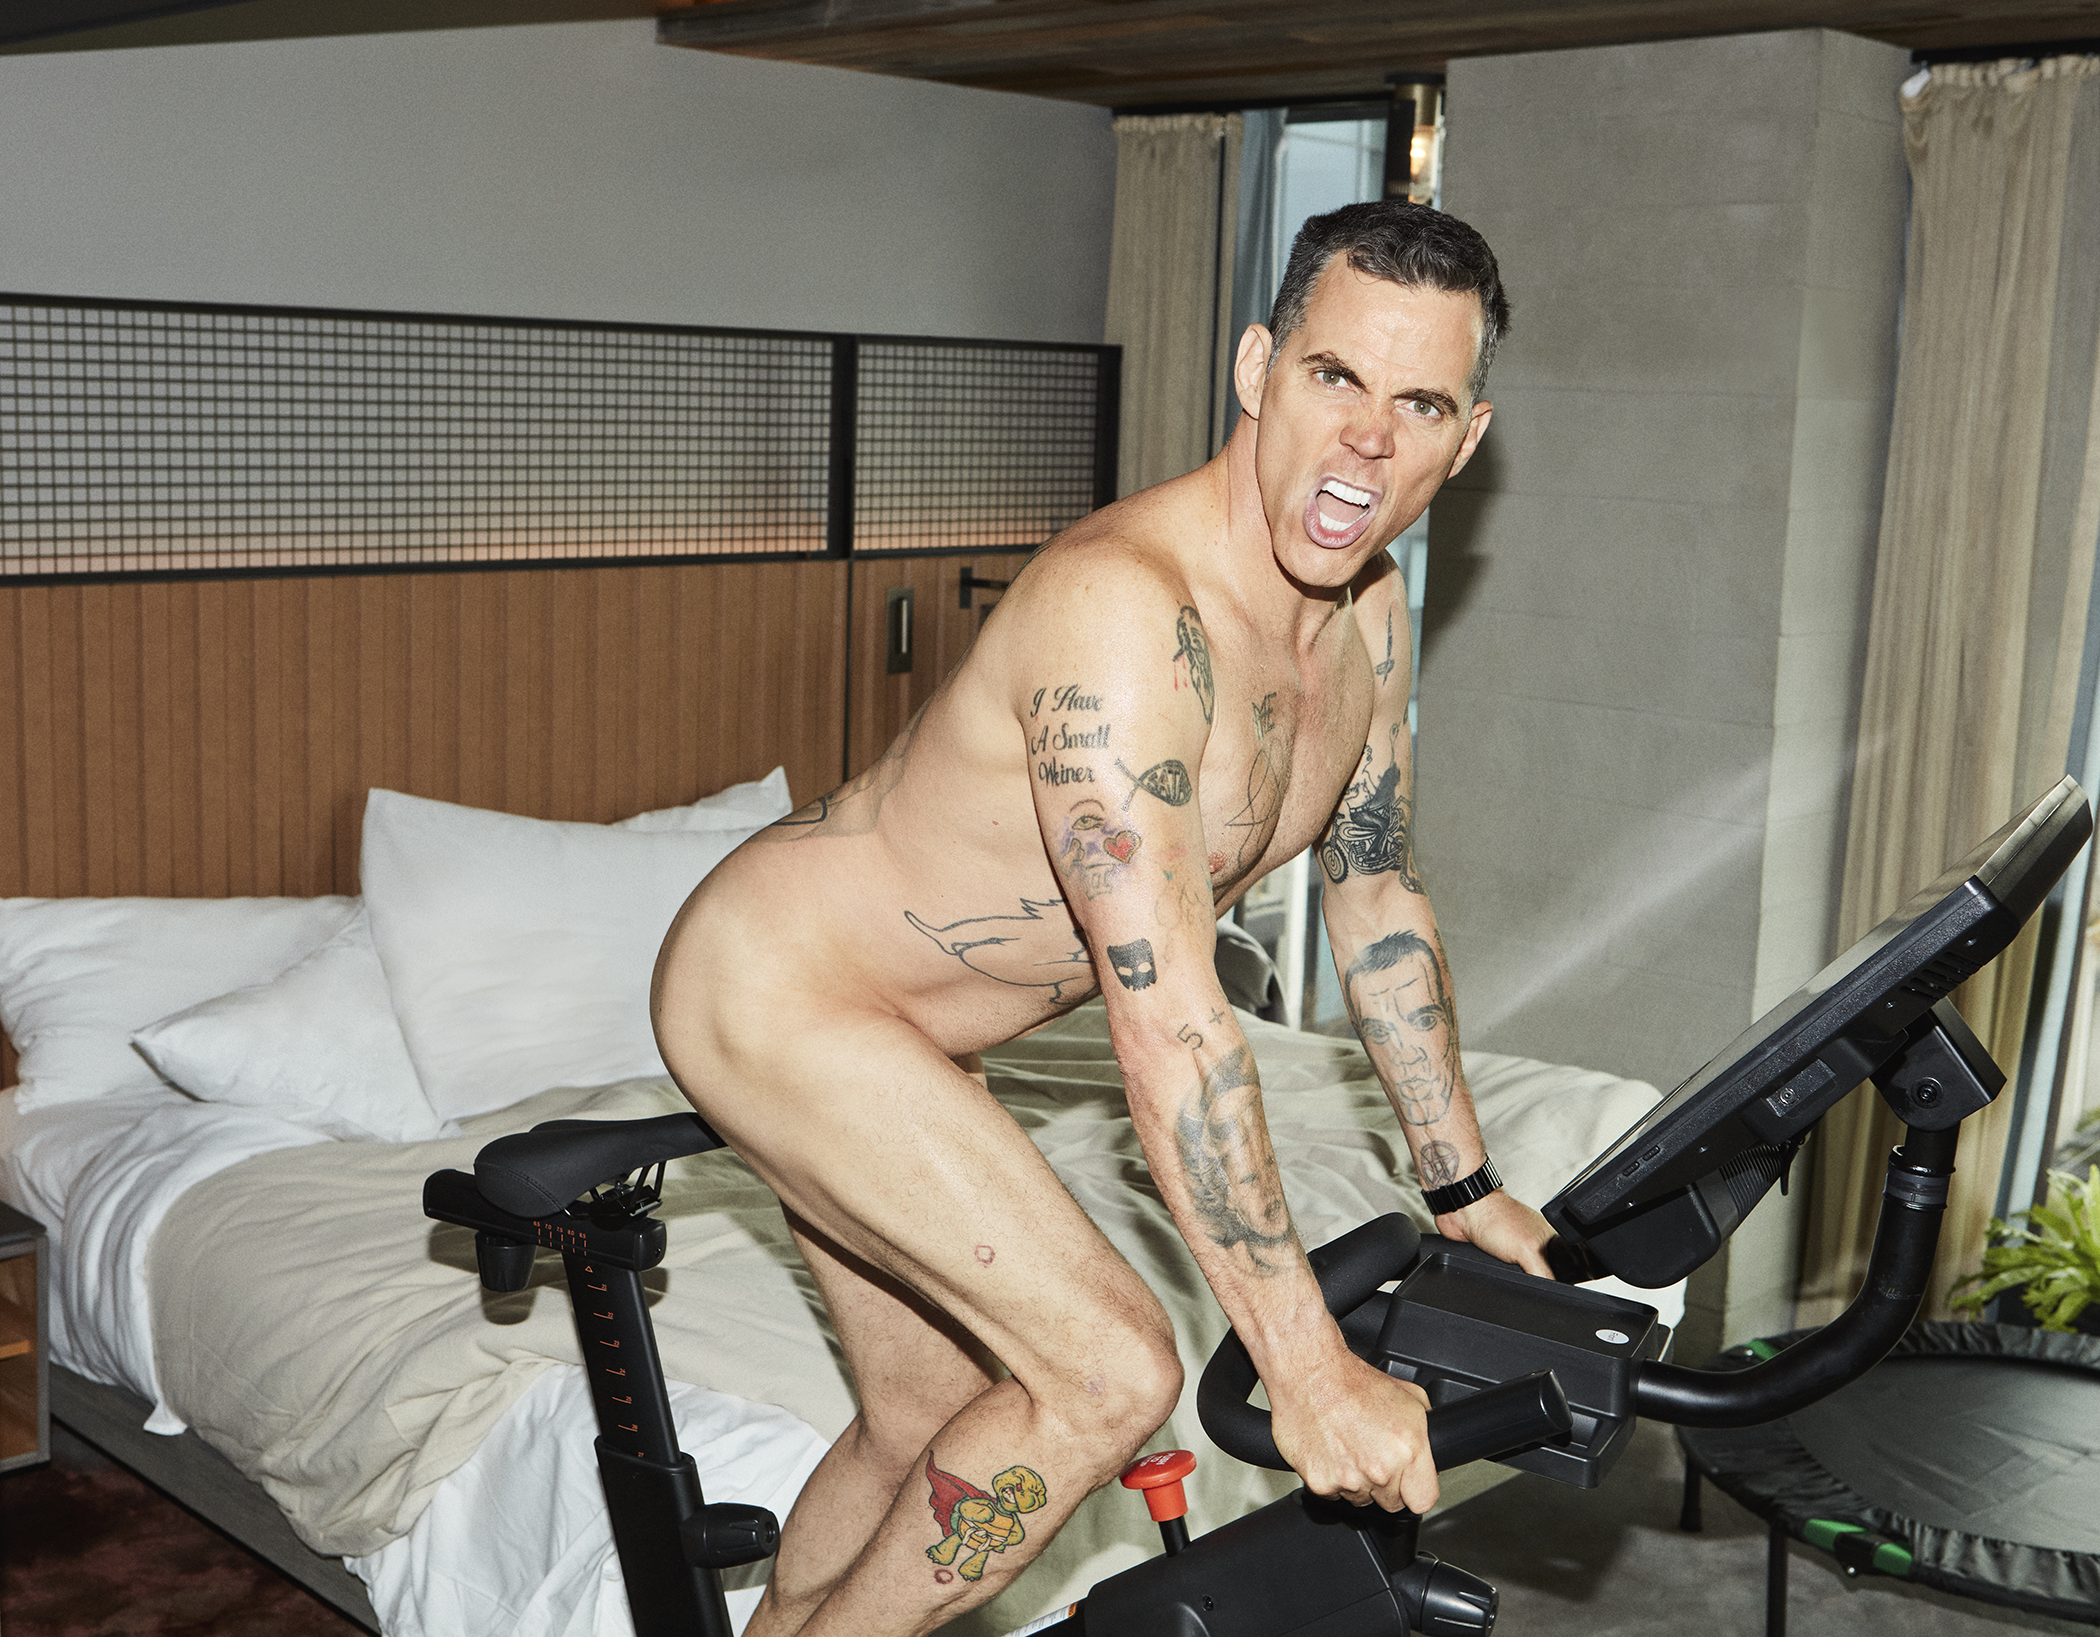 Steve-O Talks Comedy, Stunts, Sobriety and All Things Jackass hq nude pic